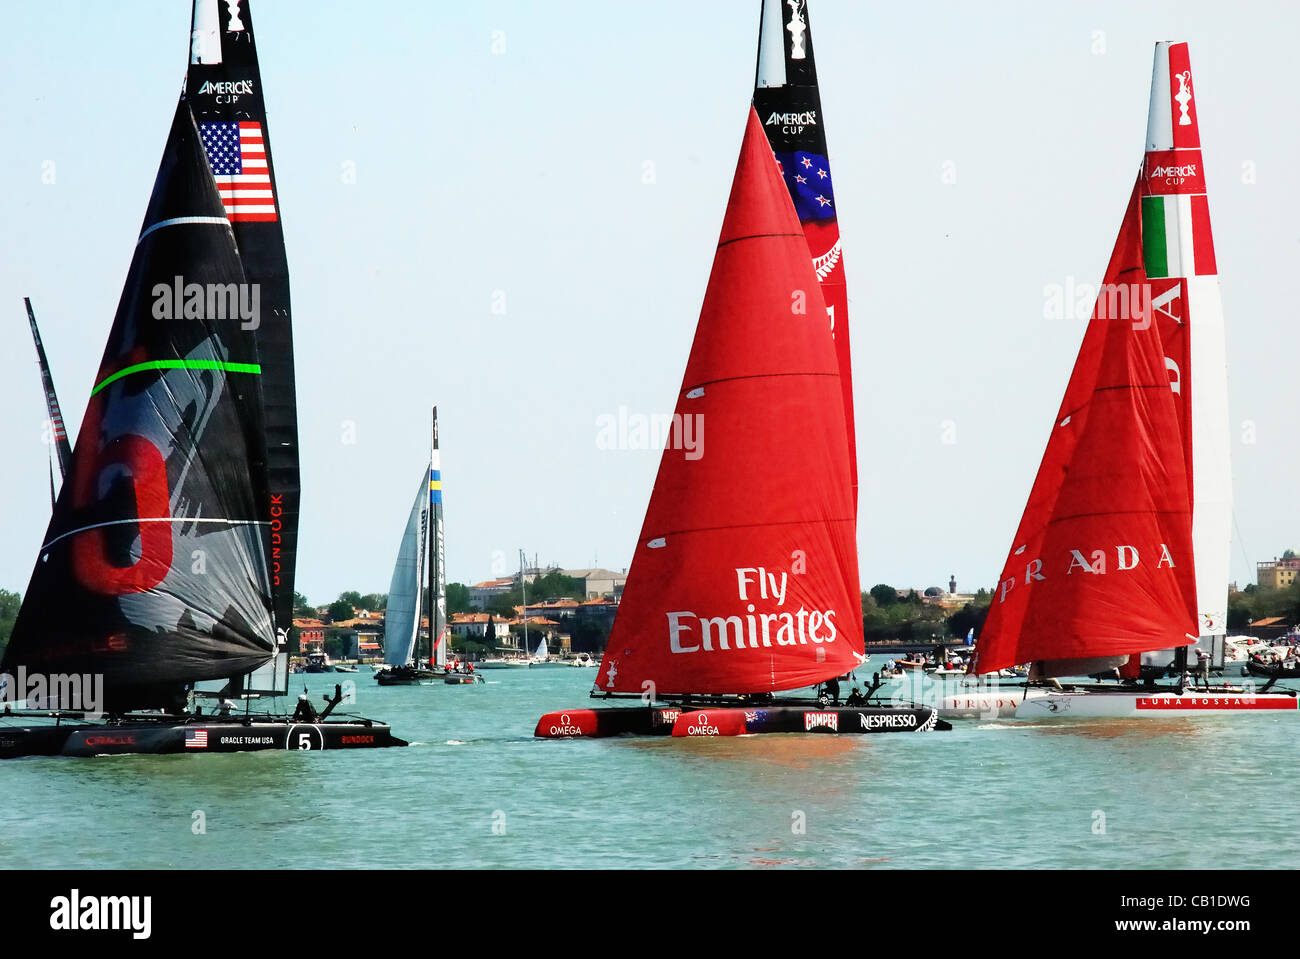 May 19, 2012 : Venice America's Cup. Luna Rossa Swordfish, Emirates and Oracle. Stock Photo